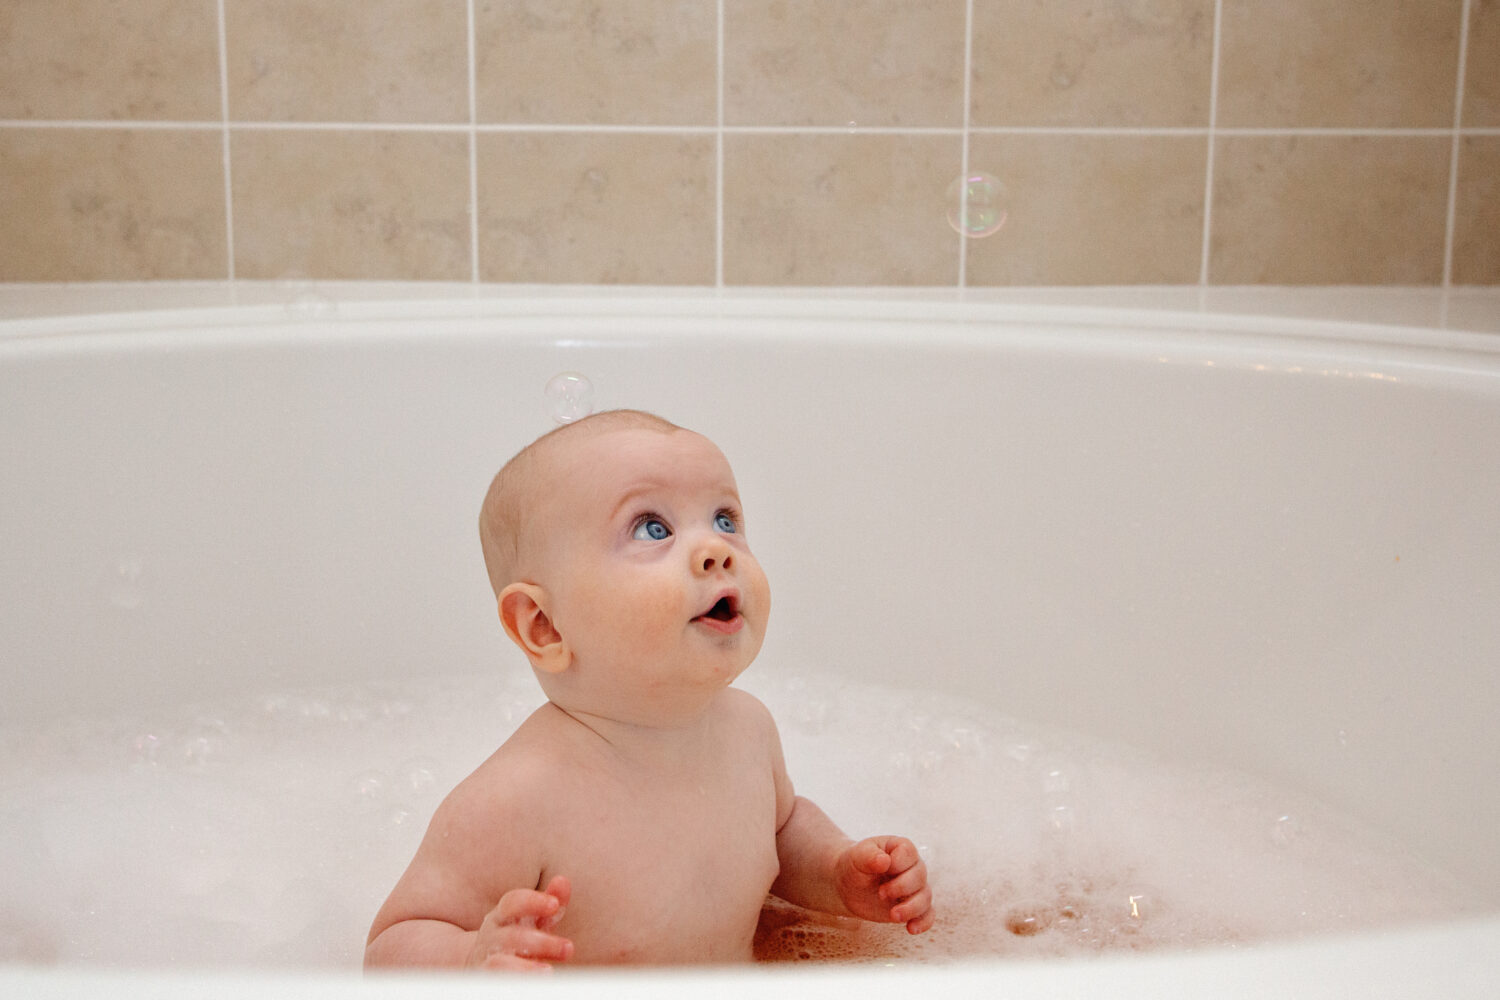 Surprised and excited baby boy in the tub looking at bubbles